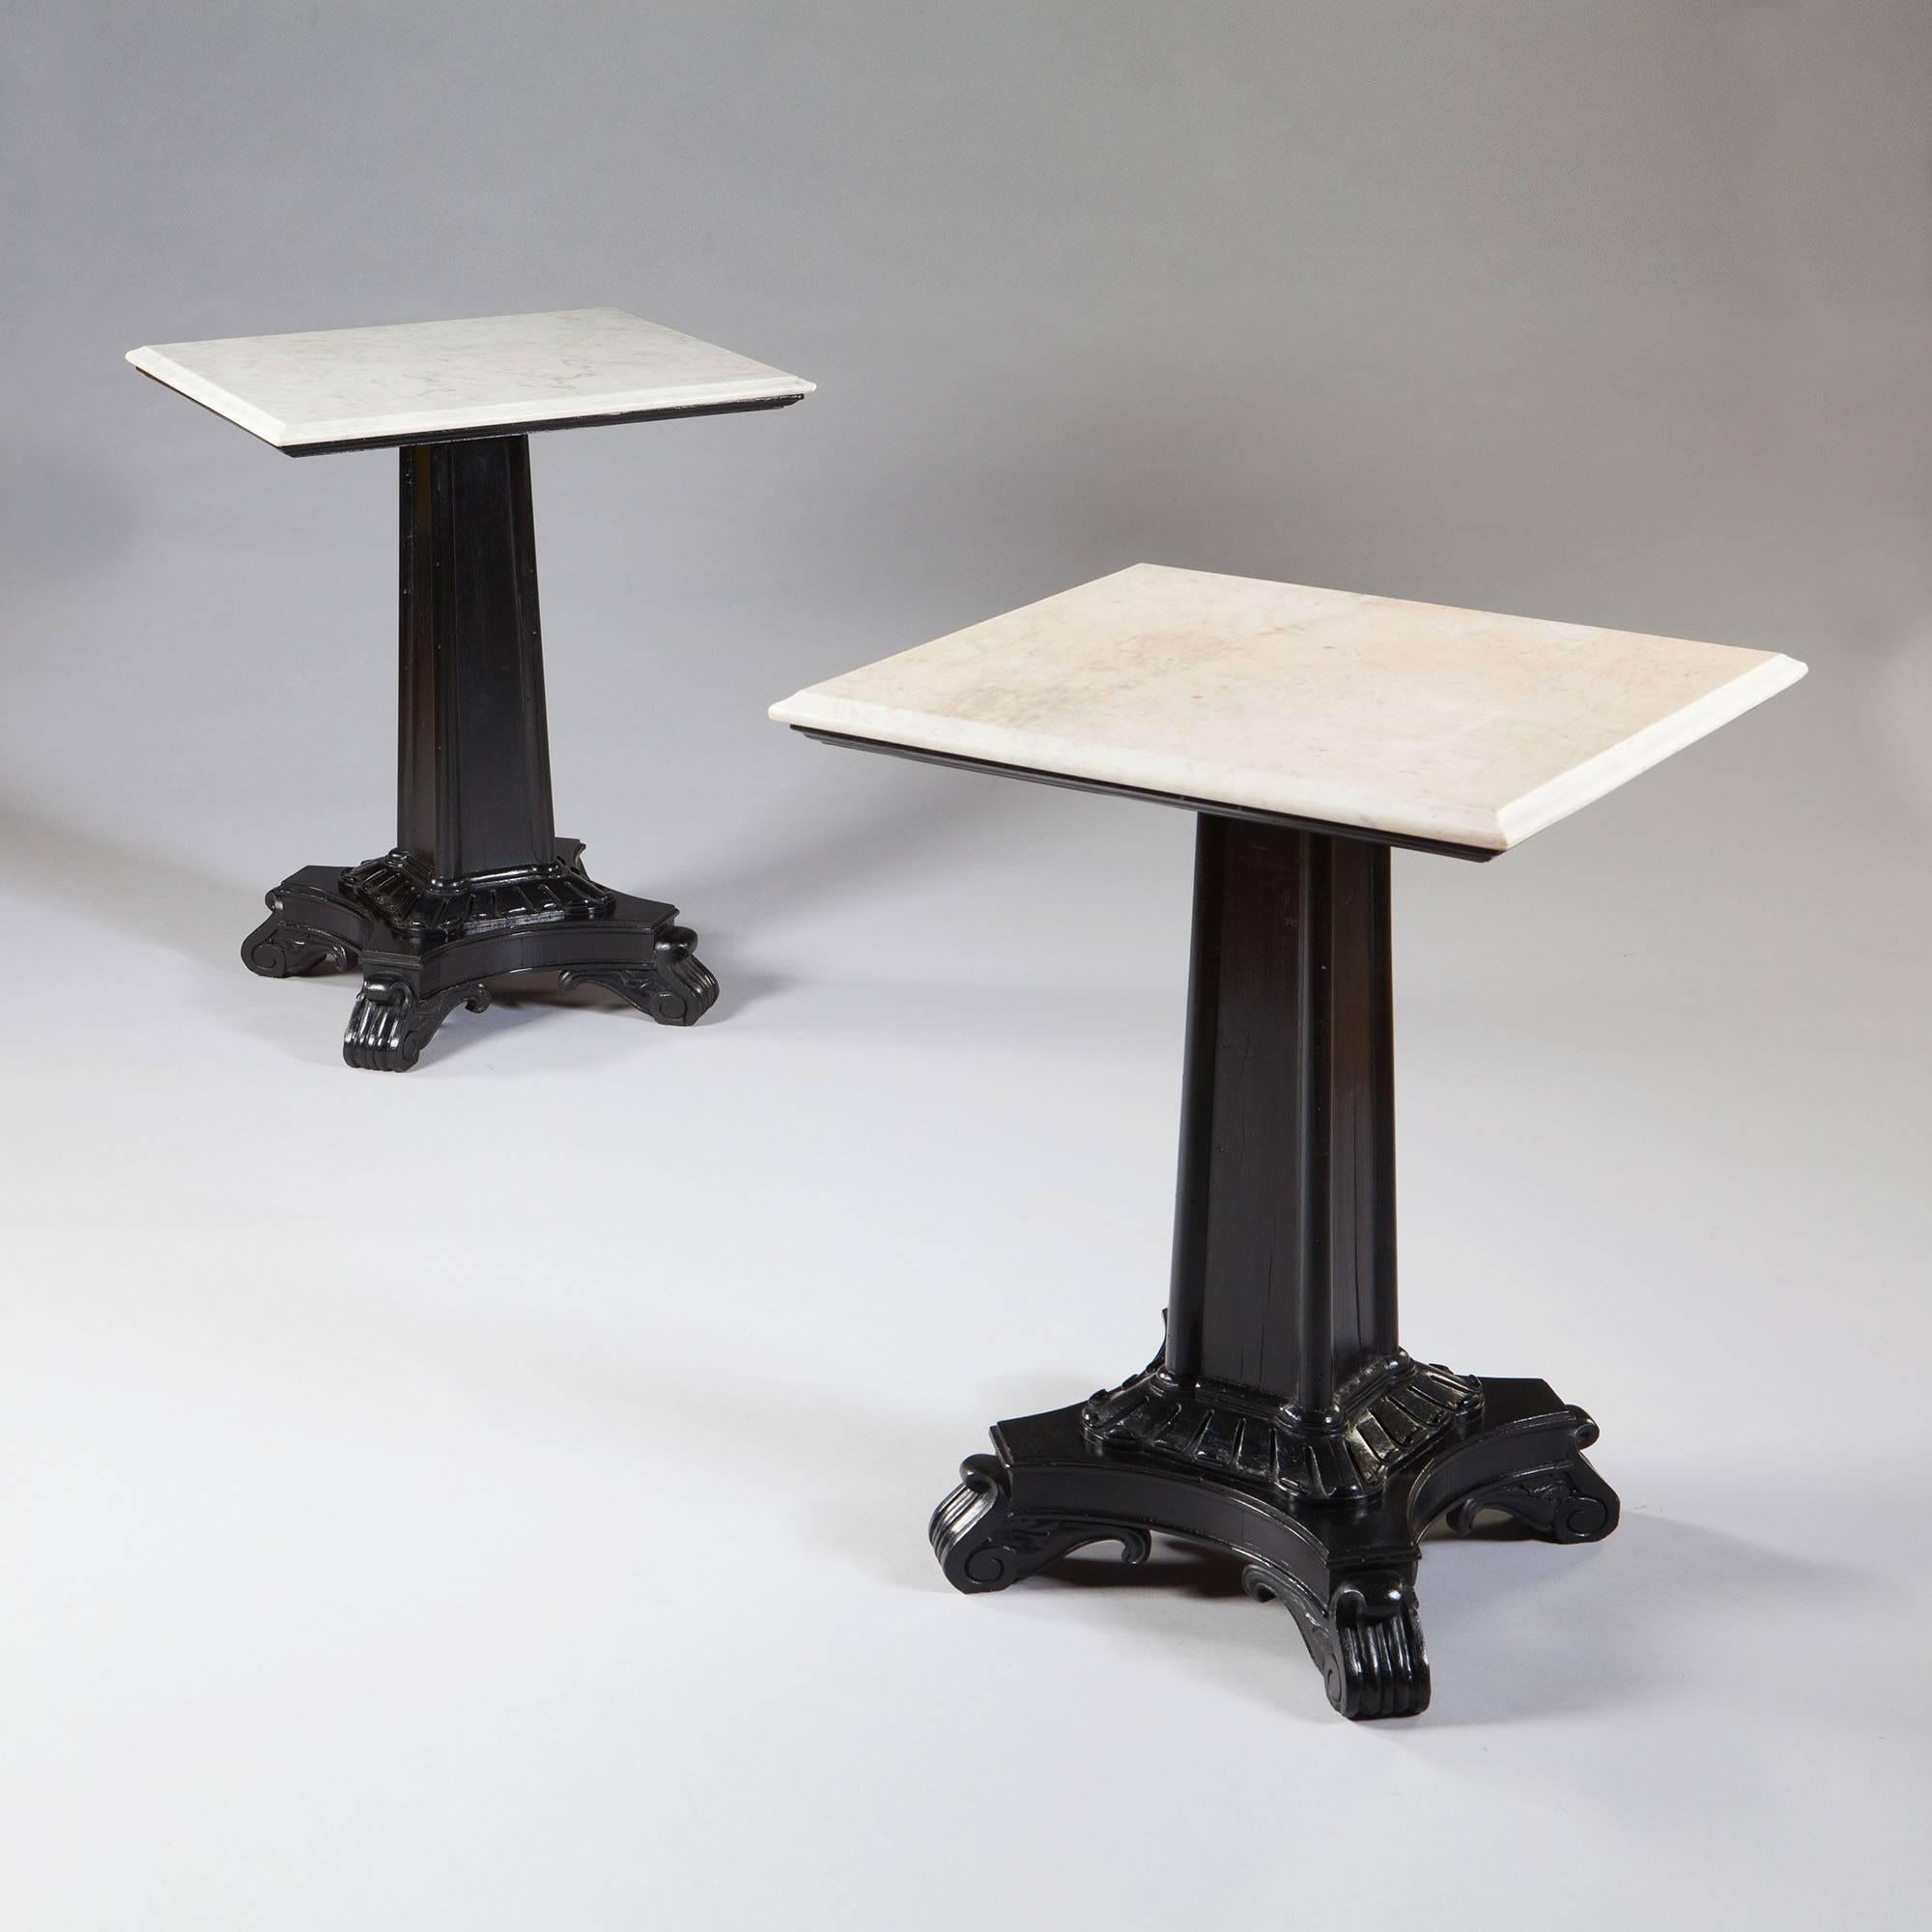 A pair of late 19th century ebonized end tables with nearly square marble tops. The bases are columns with stylized scrolls to the base and standing on concave sided plinths terminating in scroll feet,

India,, circa 1880.

Measures: Height 30